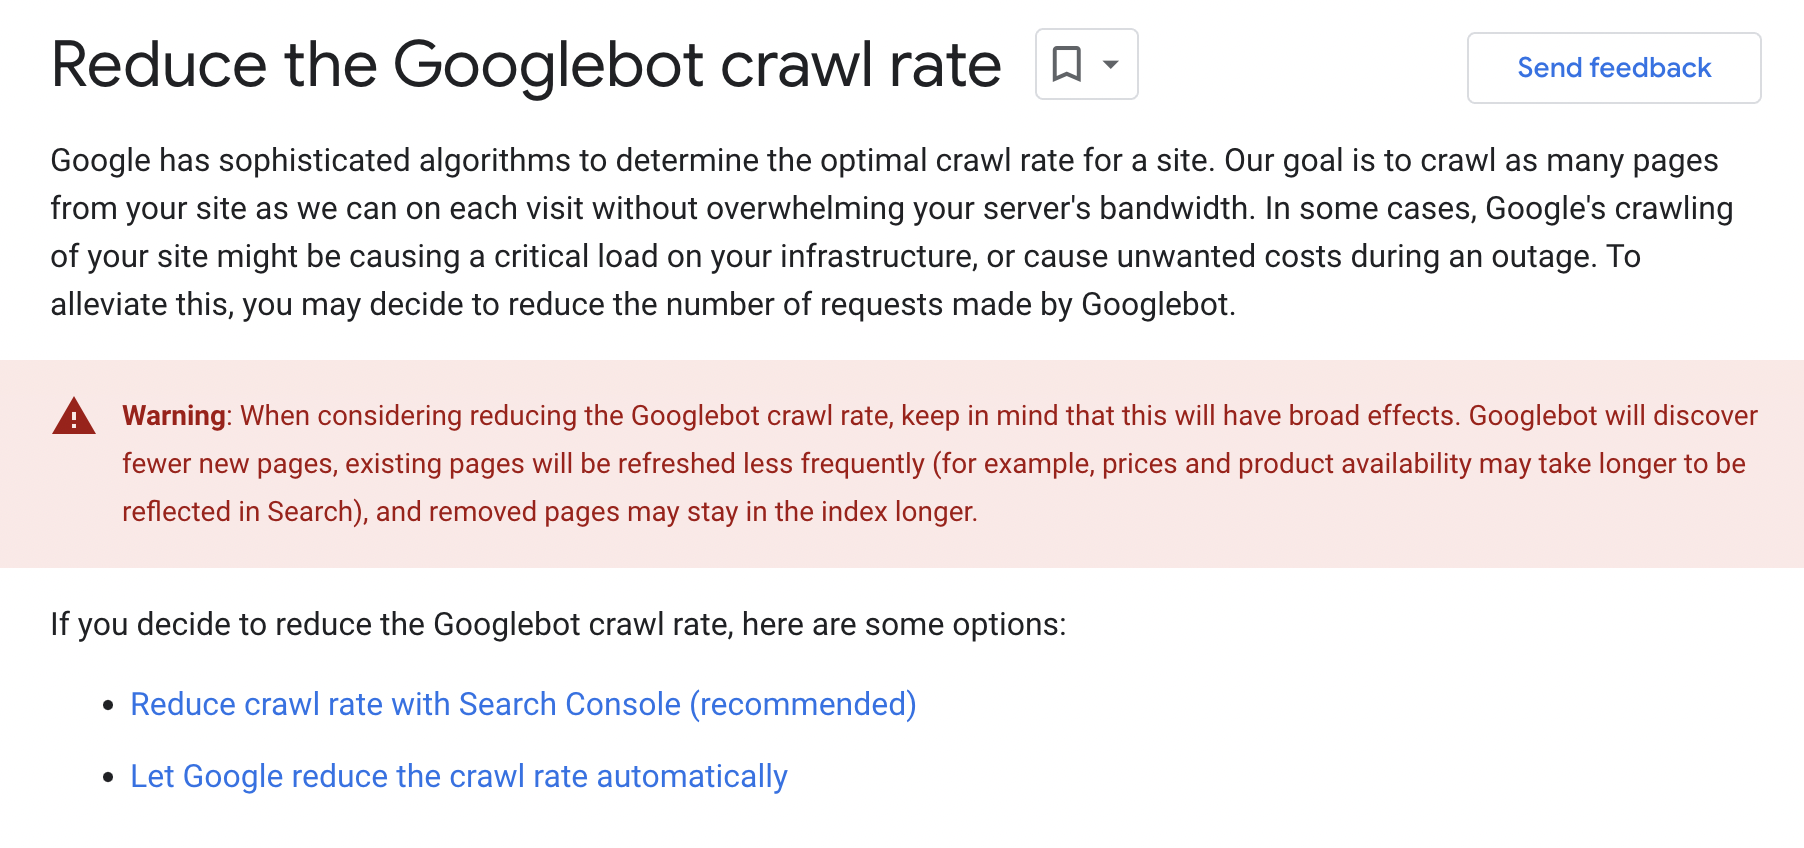 Reduce the googlebot crawl rate page